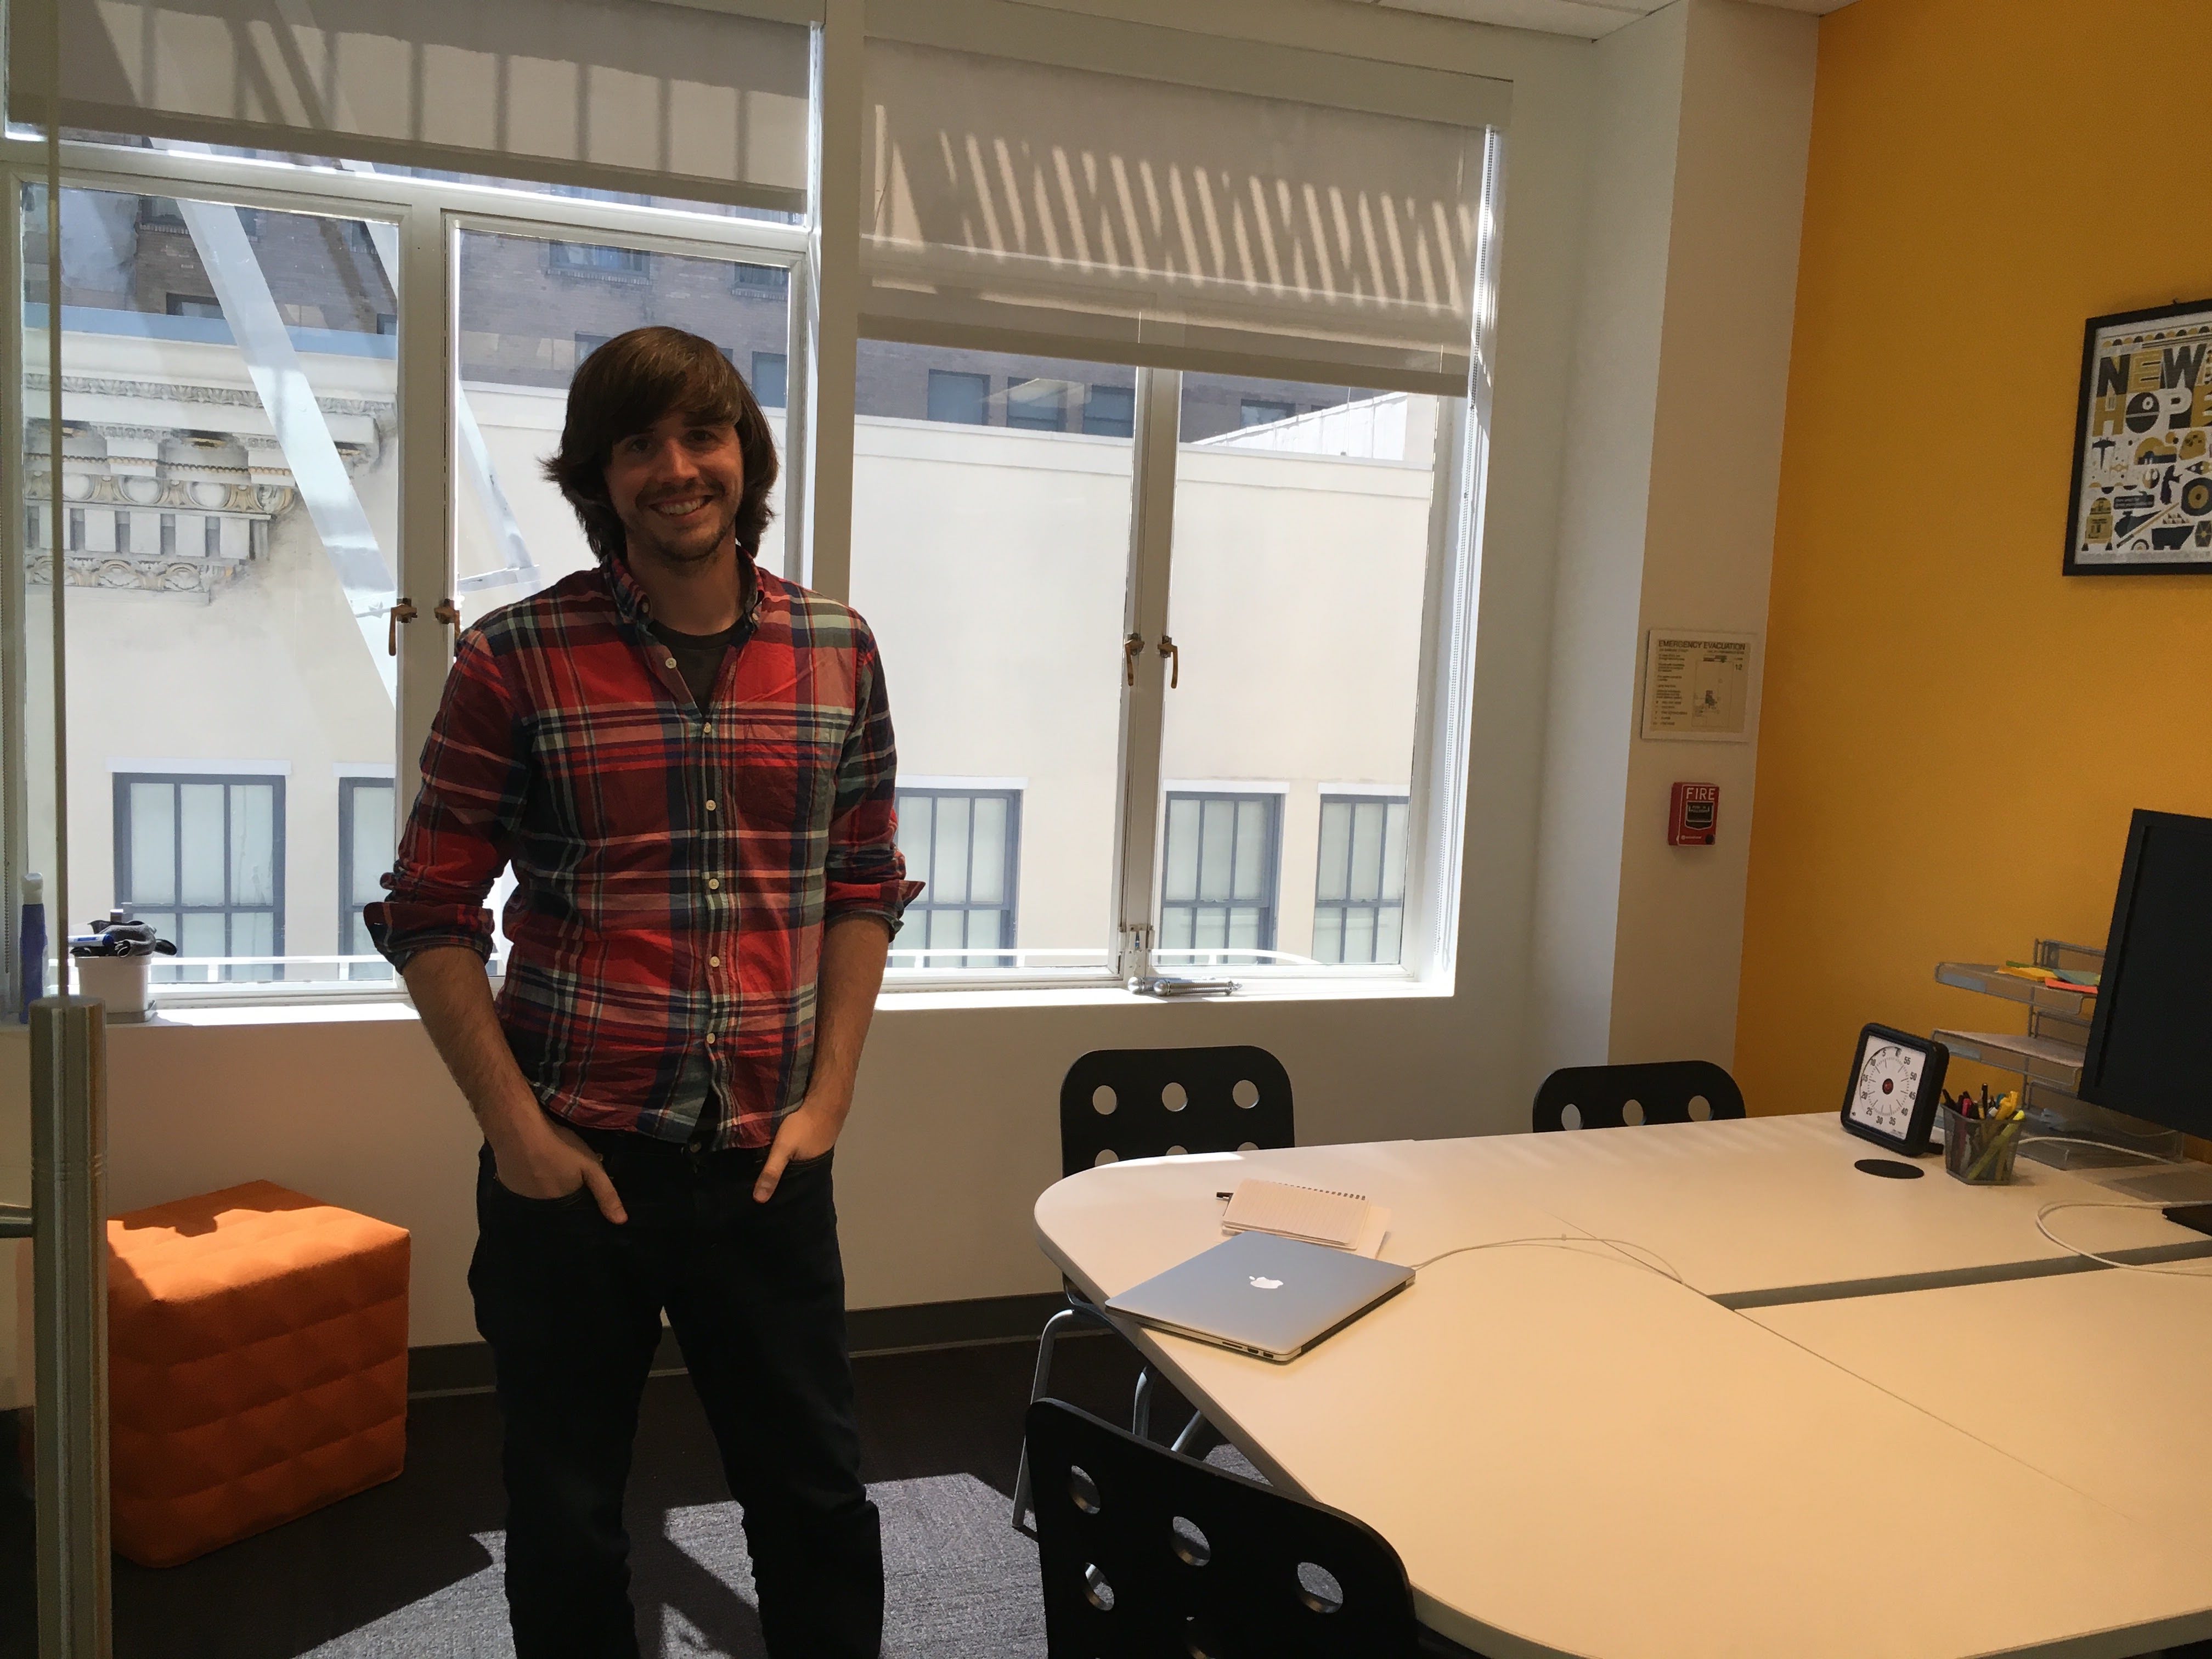 Pocket founder and chief executive Nate Weiner in his office.